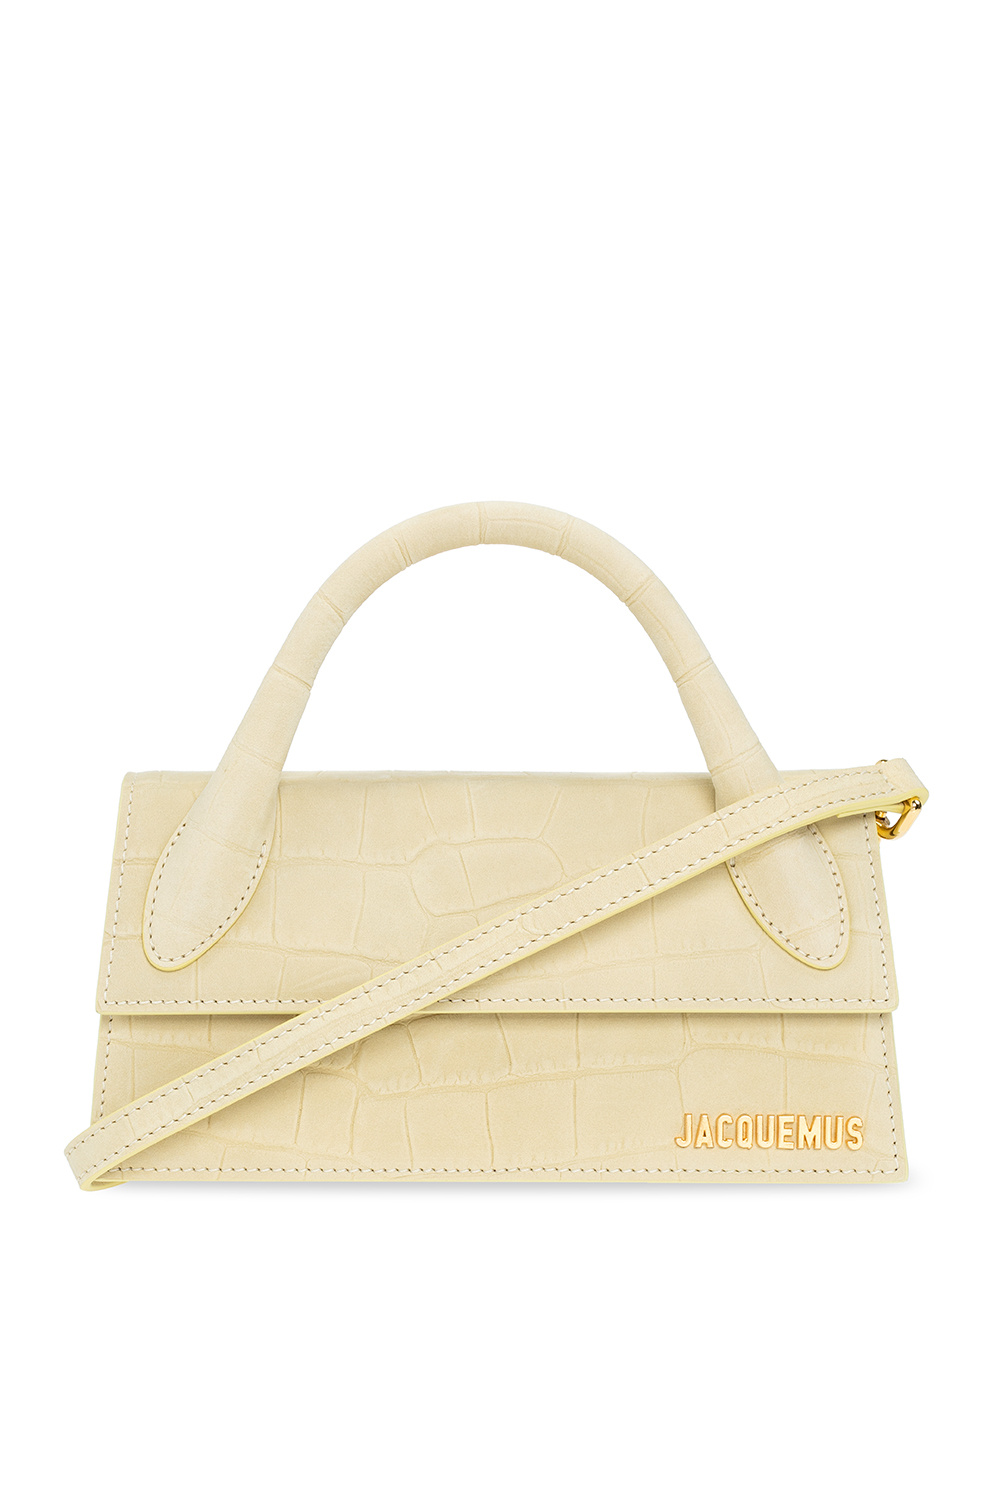 NEW Jacquemus Le Chiquito Long comes with full set, Women's